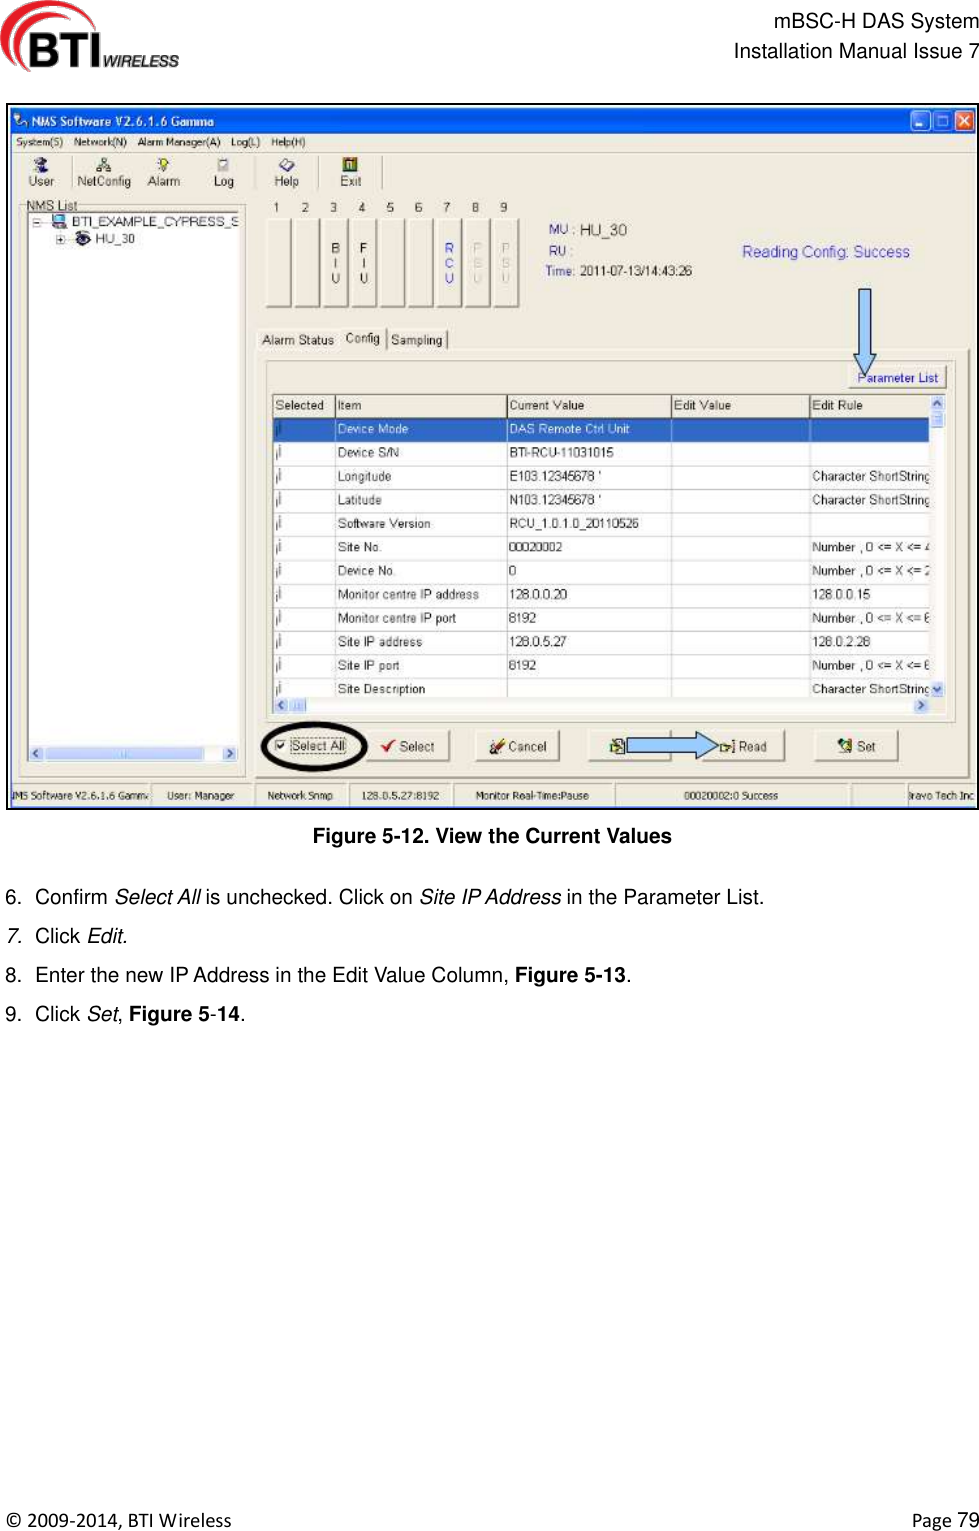                                                   mBSC-H DAS System   Installation Manual Issue 7  ©  2009-2014, BTI Wireless    Page 79  Figure 5-12. View the Current Values  6.  Confirm Select All is unchecked. Click on Site IP Address in the Parameter List. 7. Click Edit. 8.  Enter the new IP Address in the Edit Value Column, Figure 5-13. 9.  Click Set, Figure 5-14.    